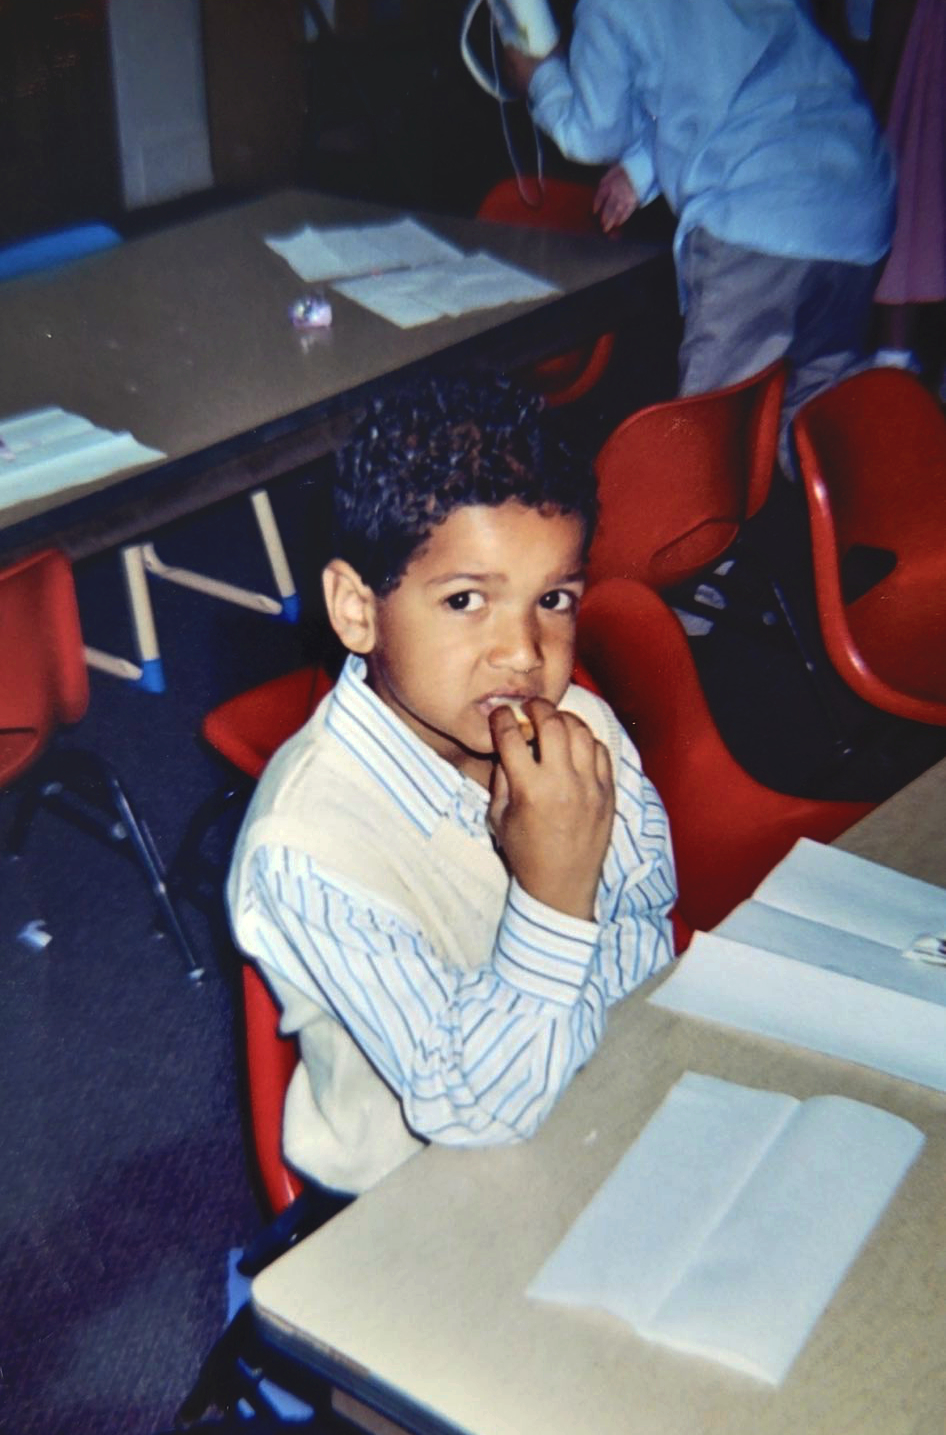 a child sitting at a desk in school